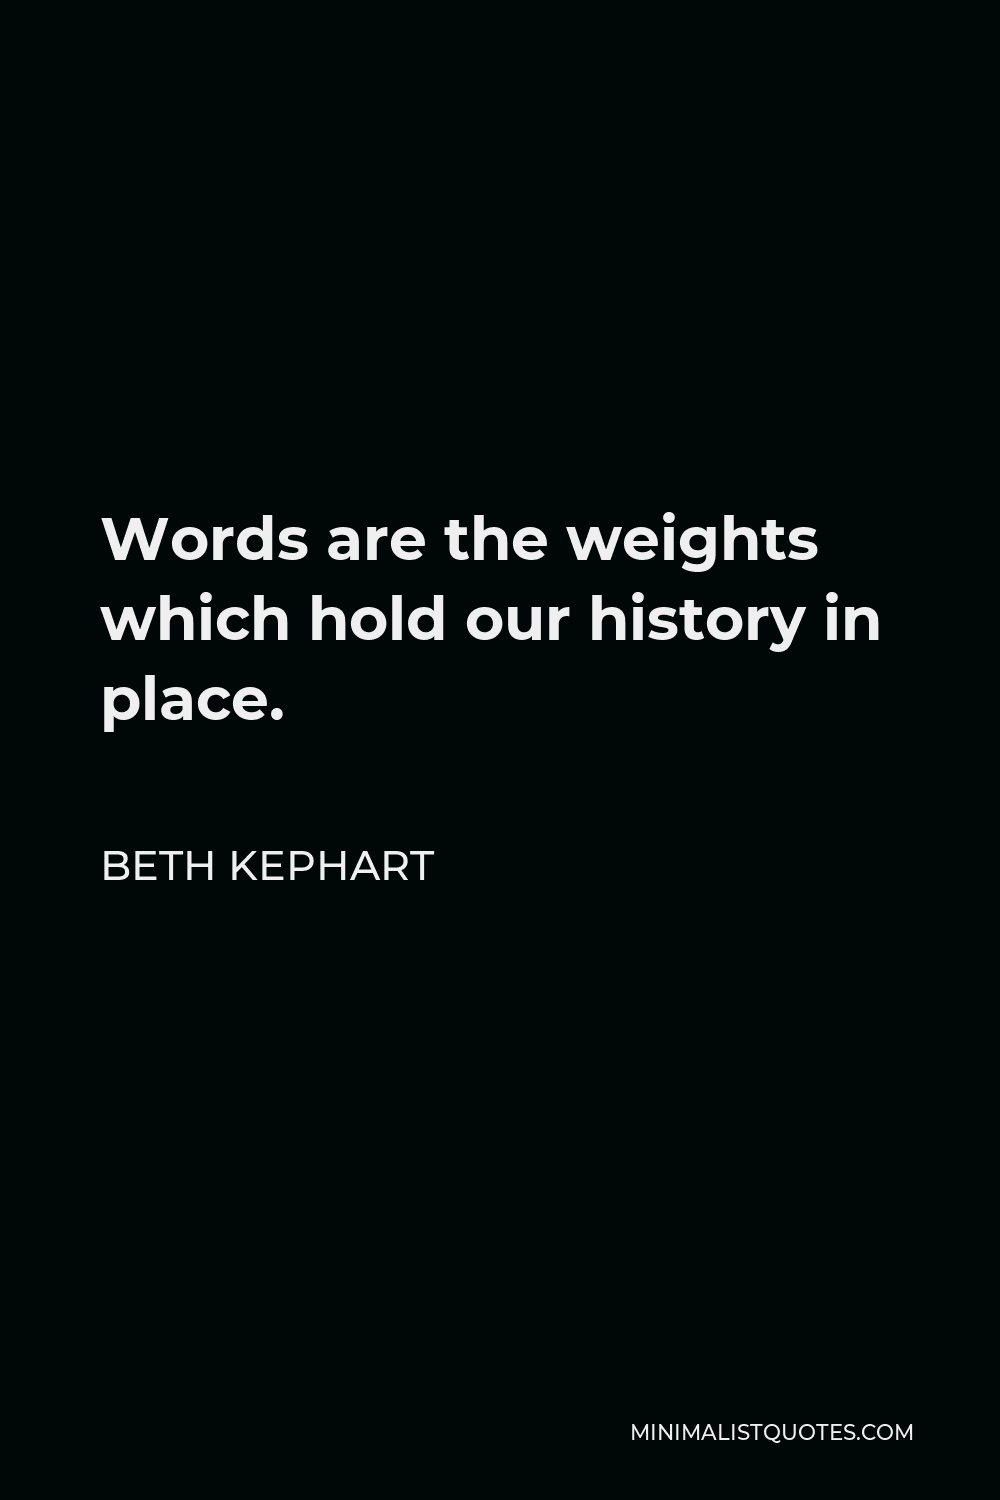 Beth Kephart Quote - Words are the weights which hold our history in place.